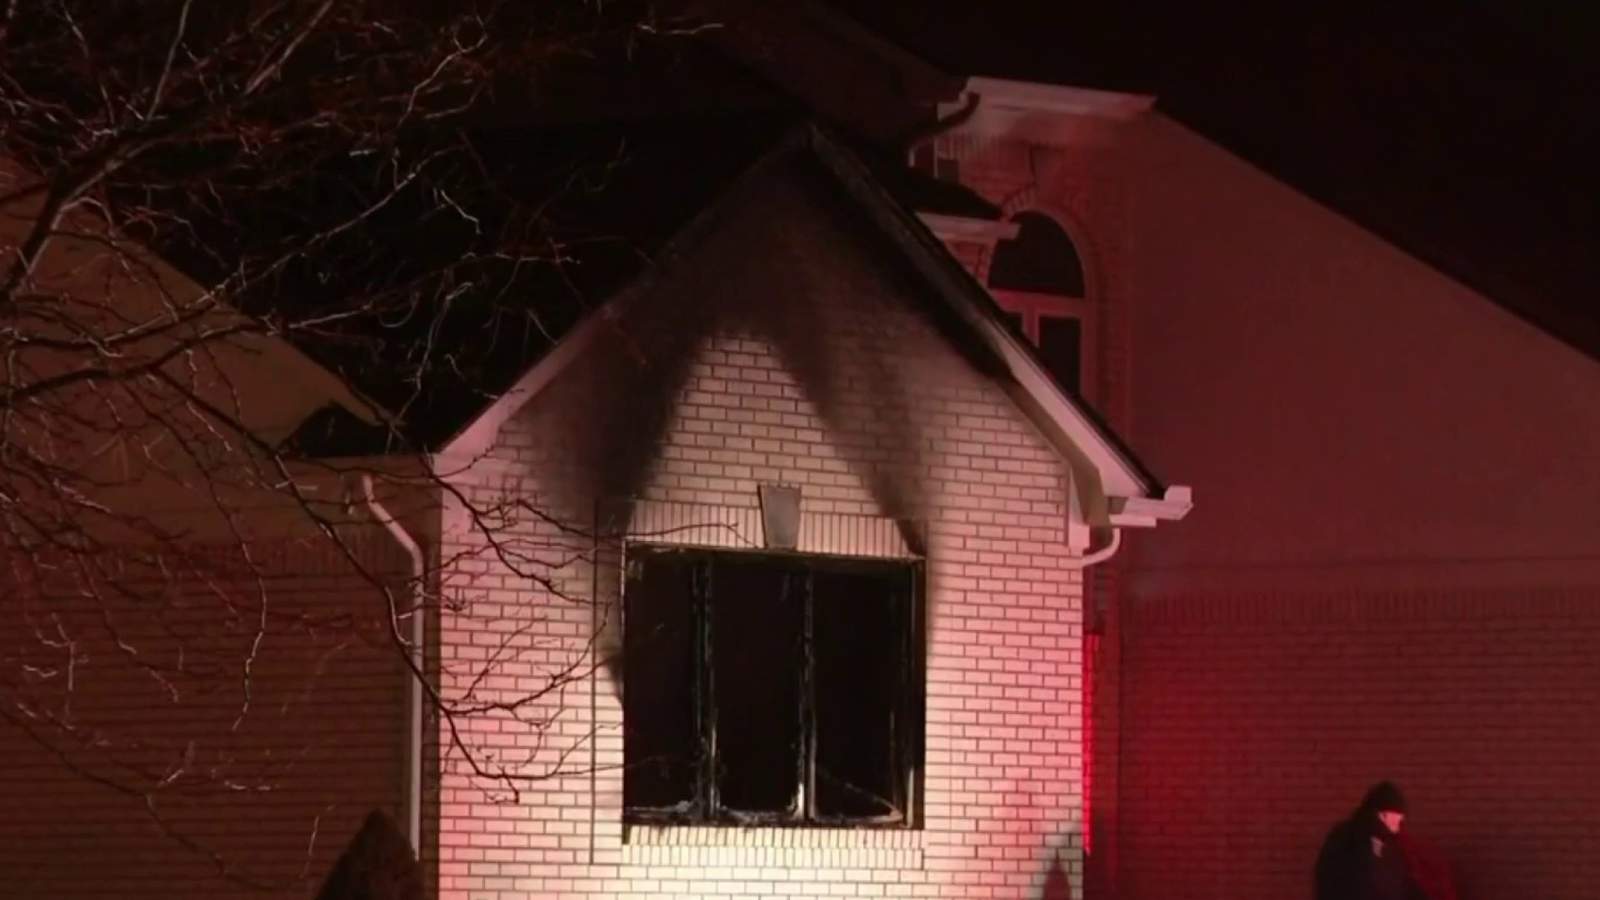 Morning Briefing Feb. 28, 2021: 1 killed, 2 injured in Sterling Heights house fire, barricaded situation in Royal Oak ends, US authorizes third COVID-19 vaccine